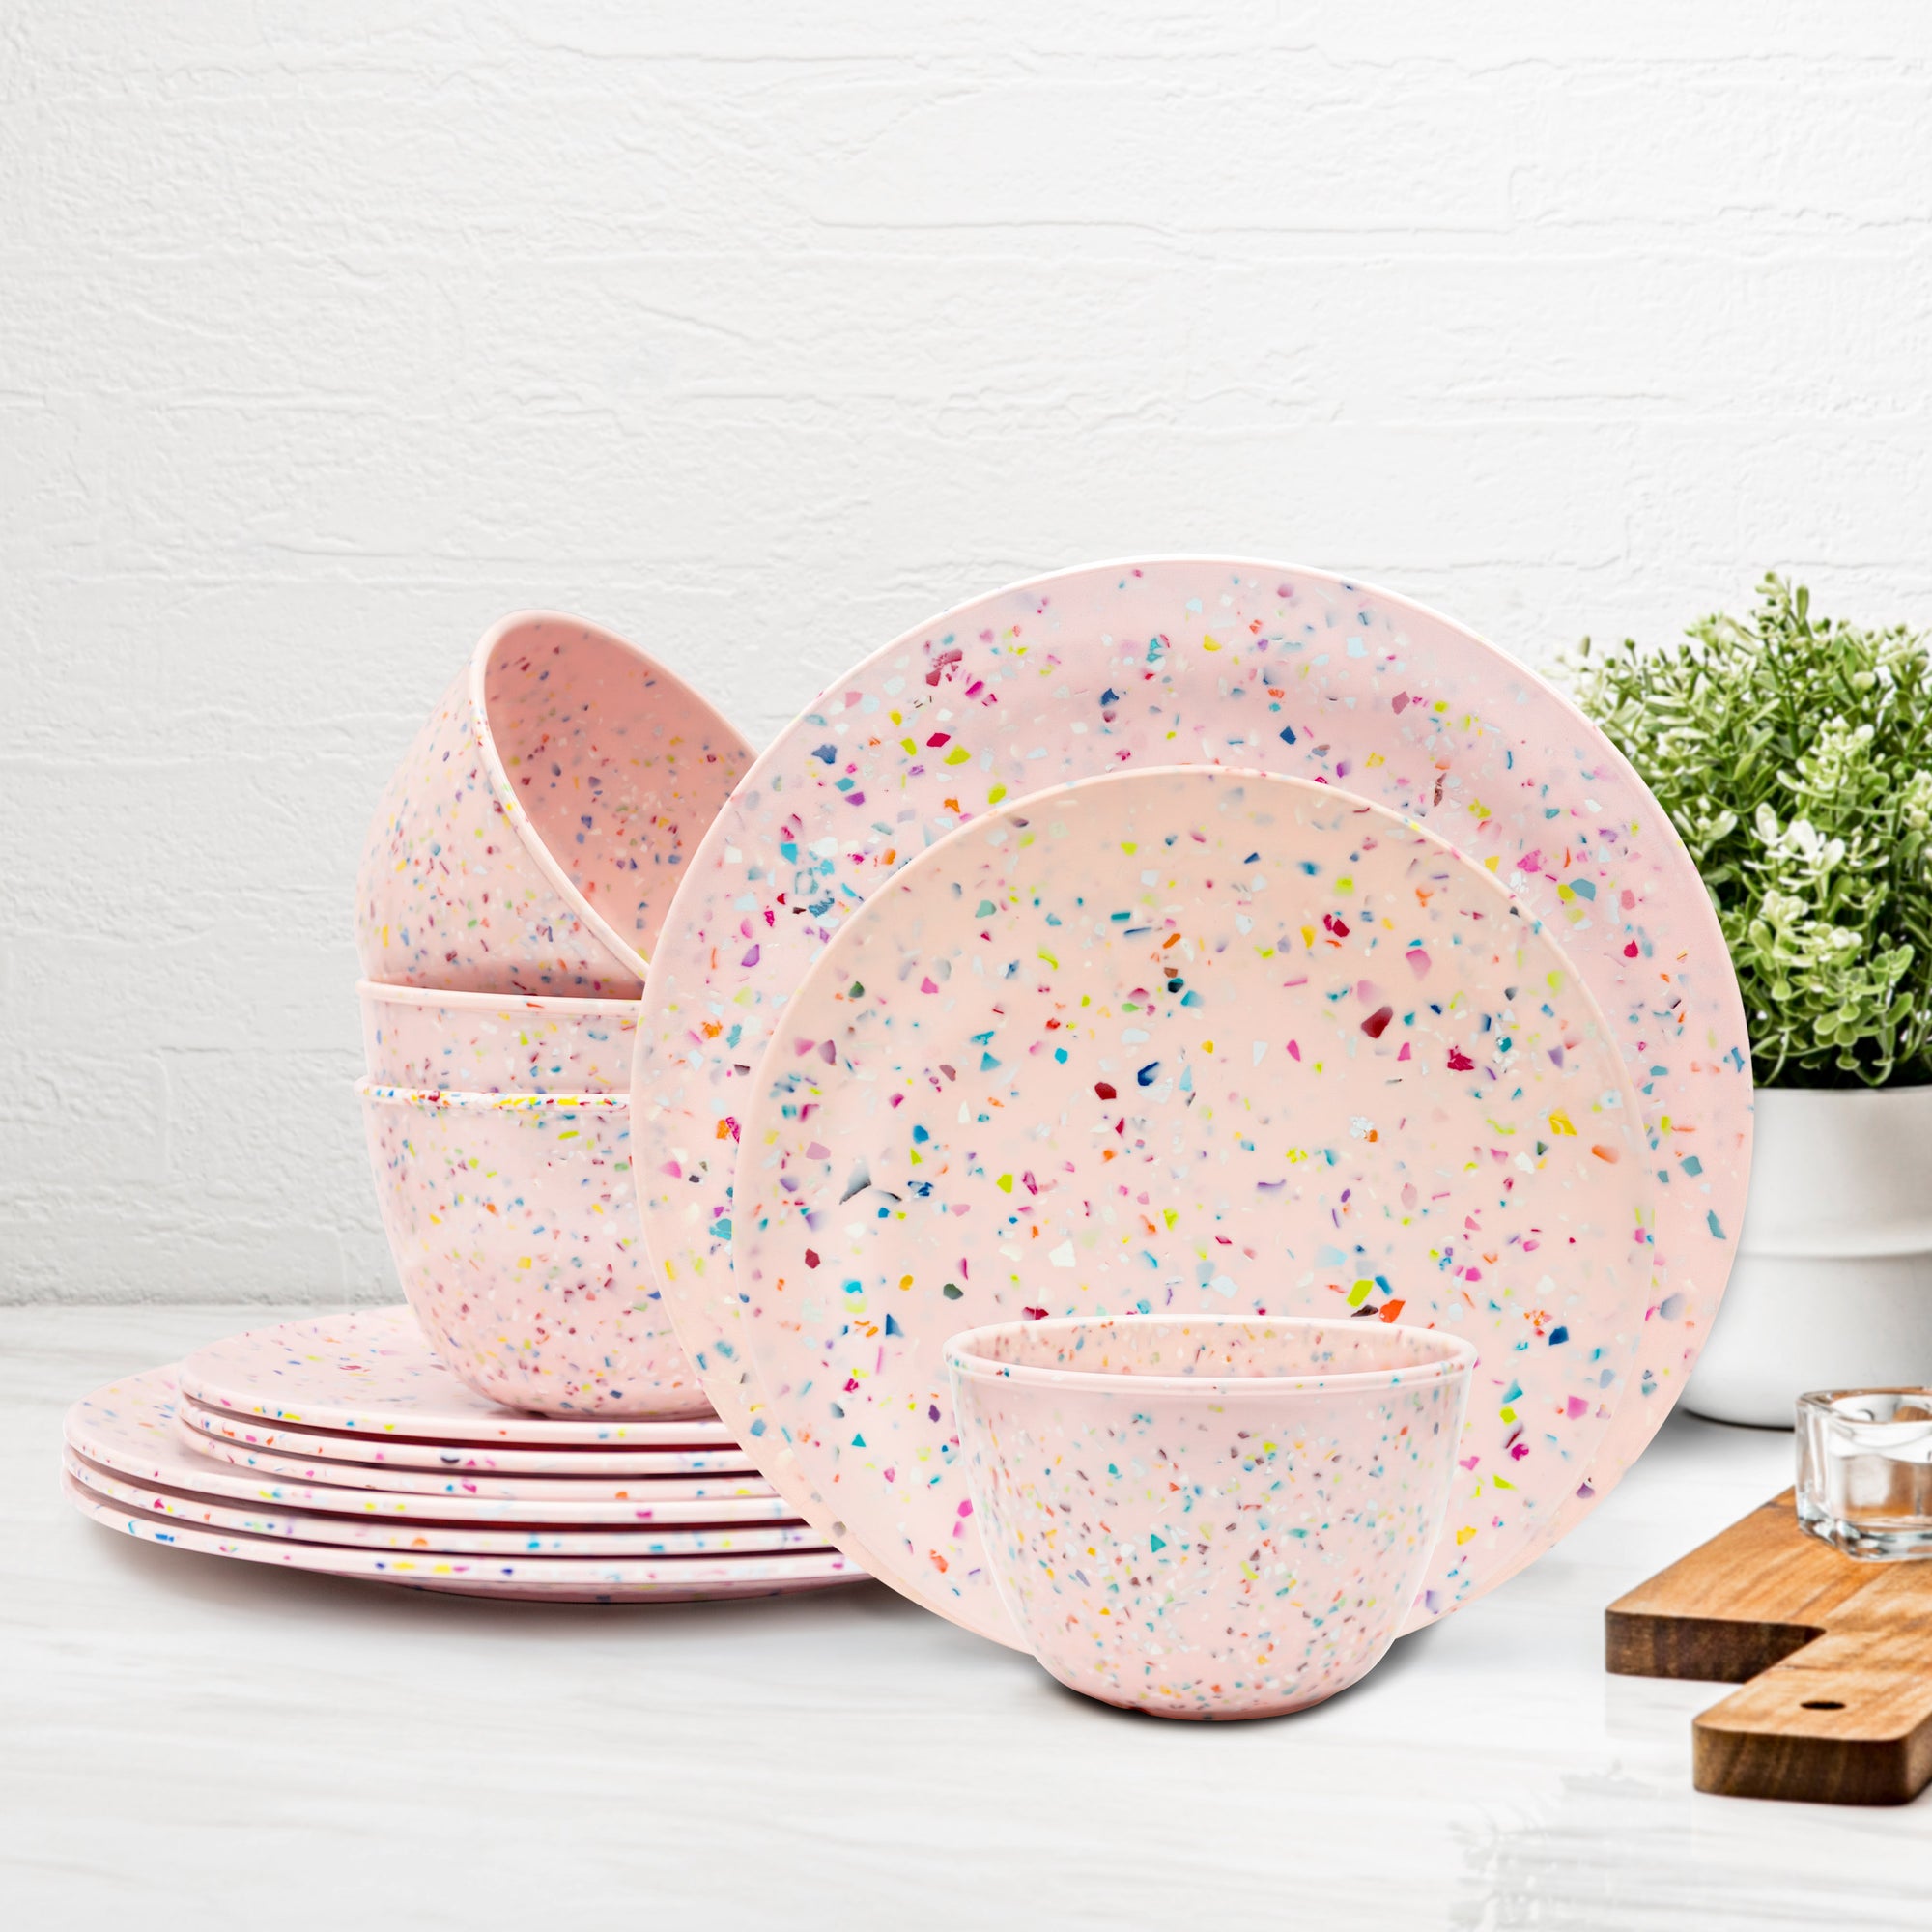 Confetti Melamine Dinnerware Set - Durable, Recycled Plates and Bowls, Pink